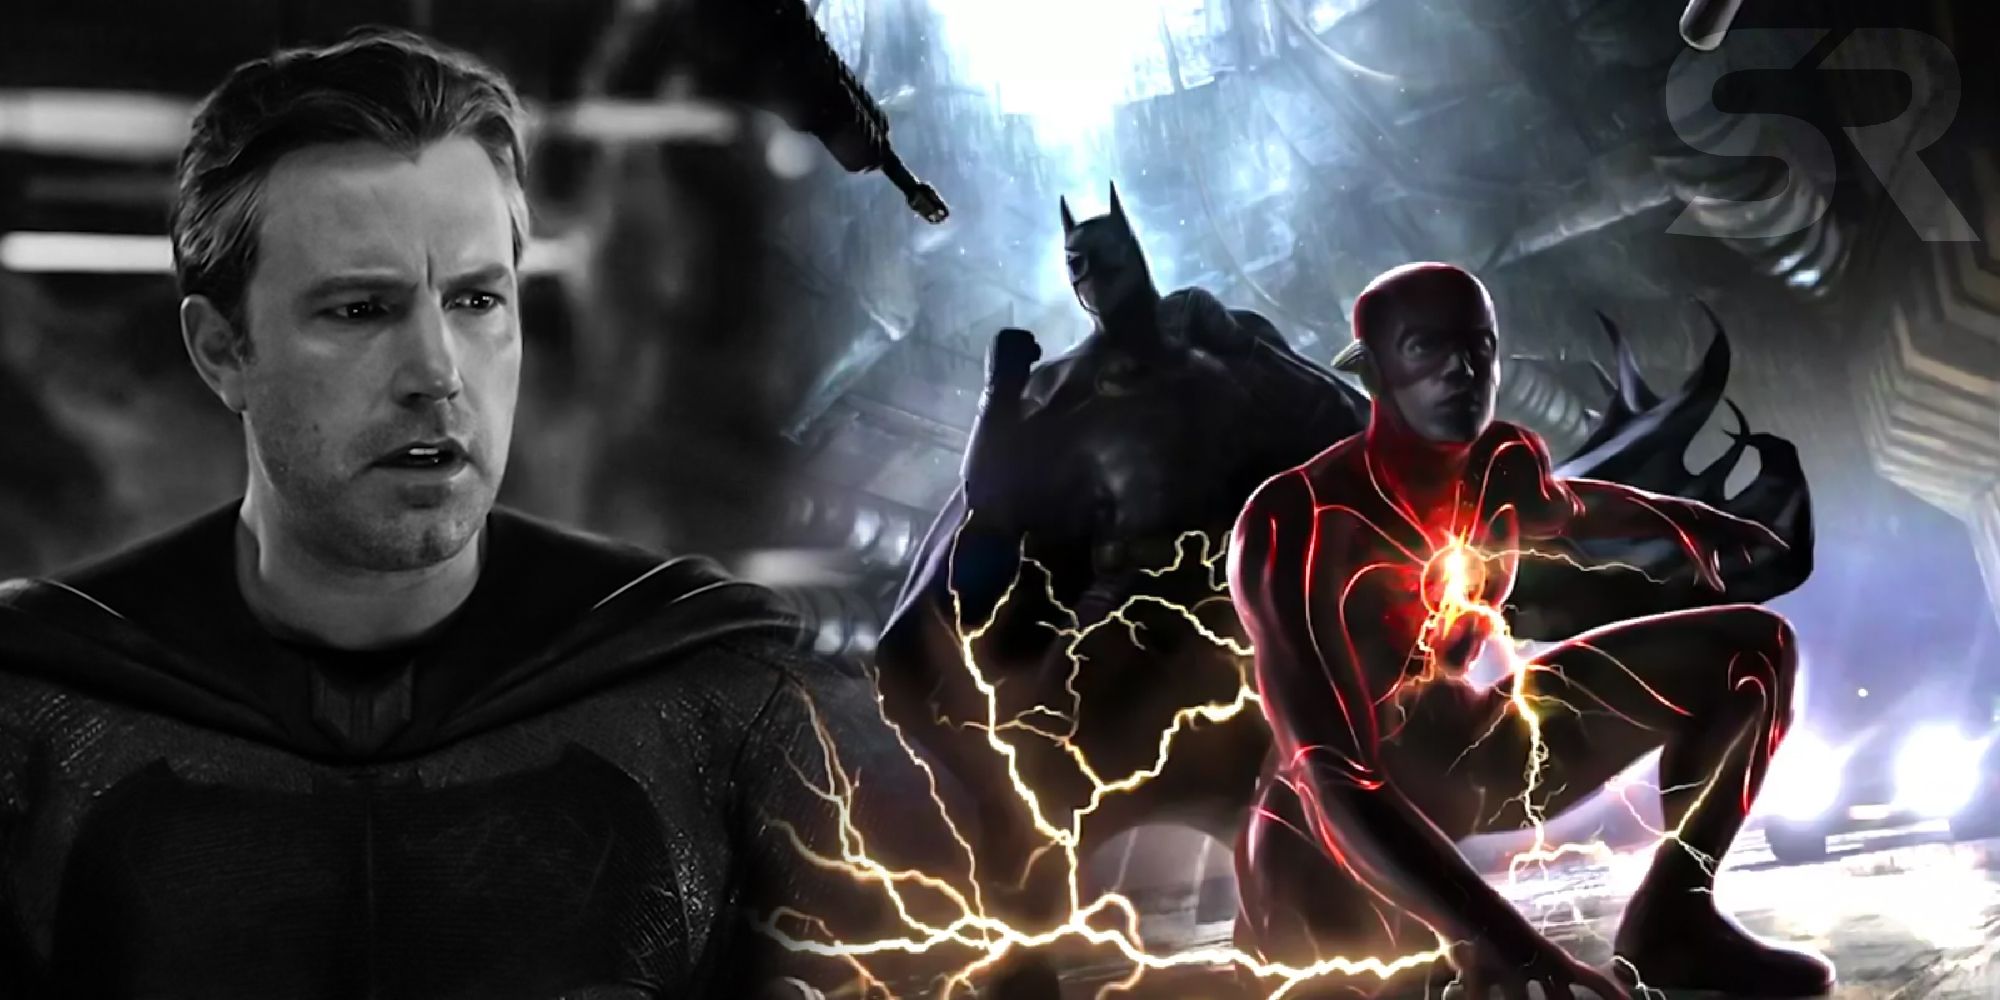 Ben Affleck as batman in the Justice League the Snyder Cut and concept art for the Flash